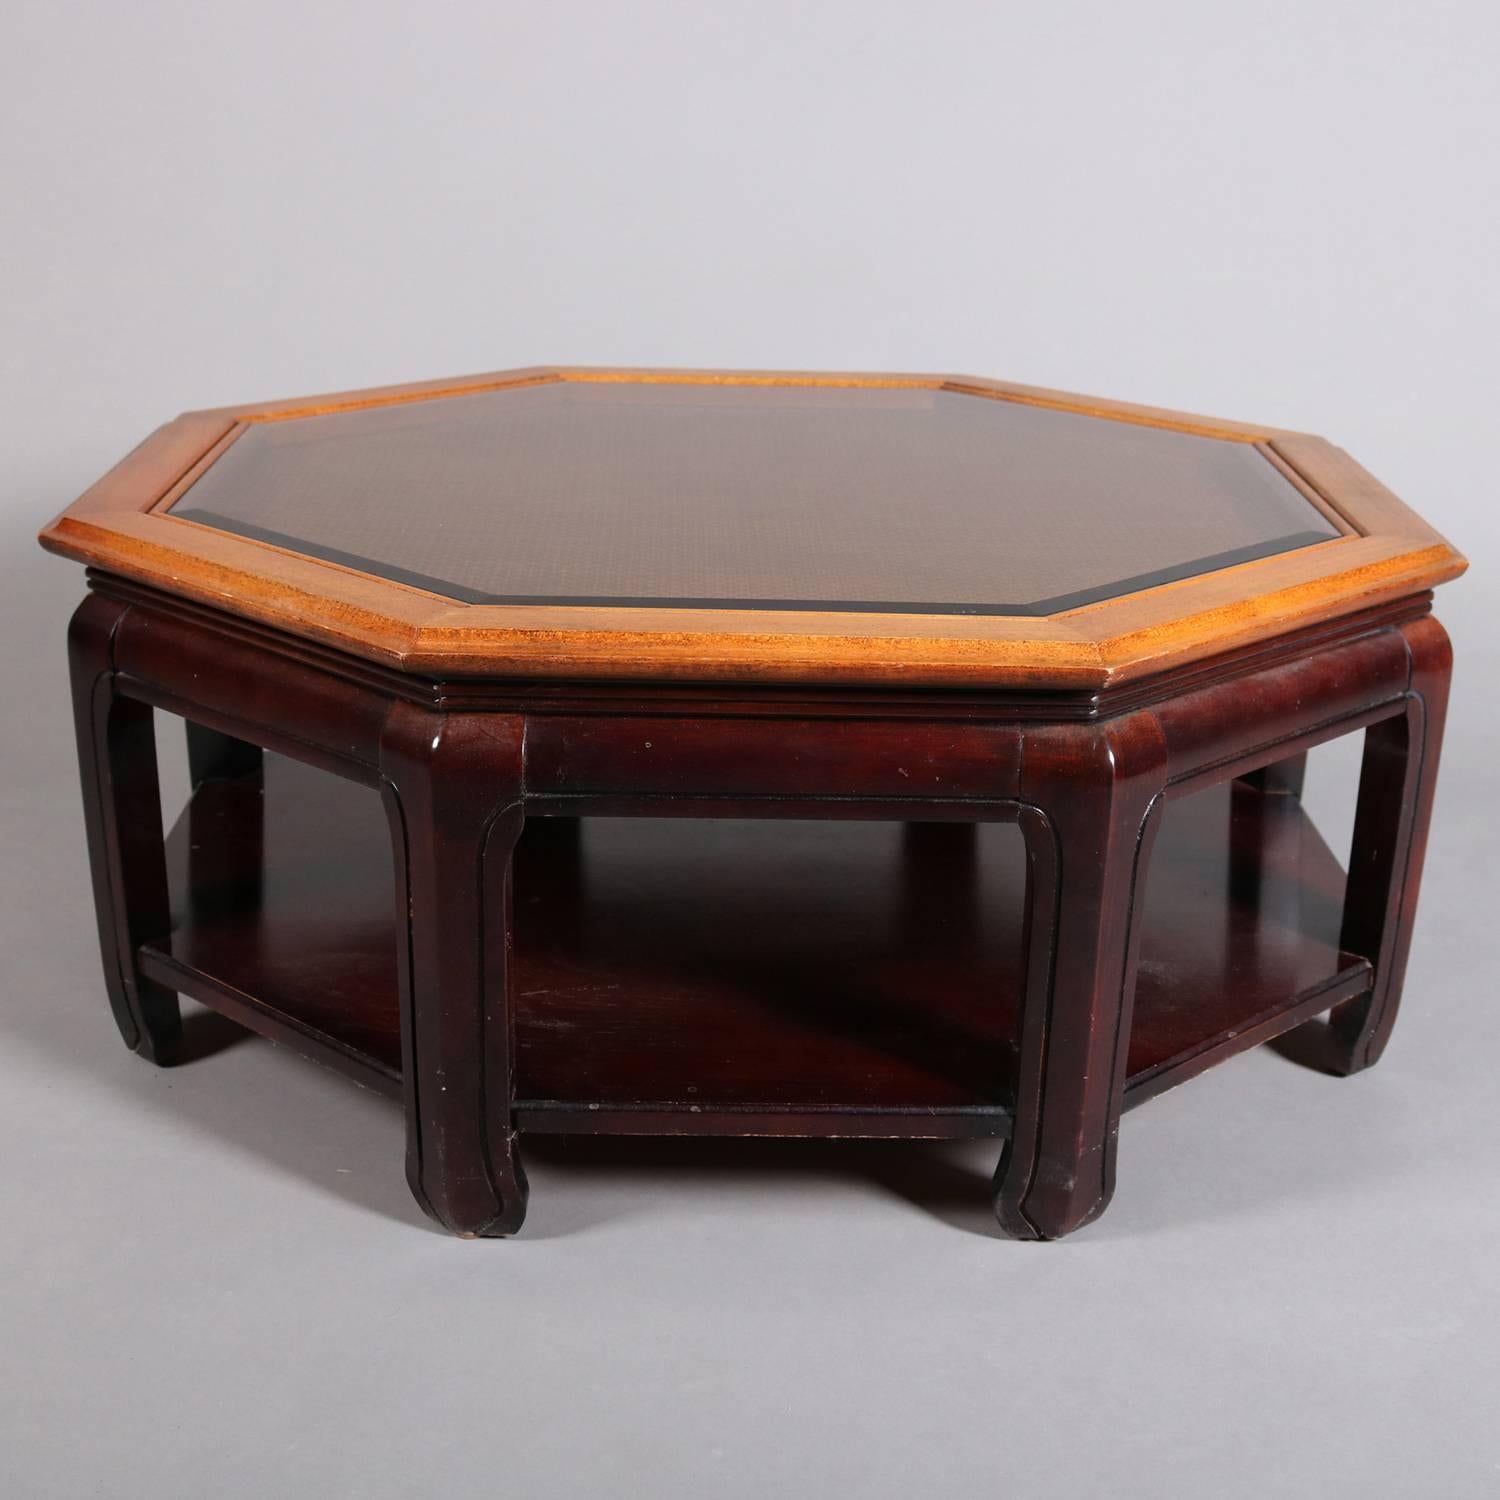 Antique Chinese style hexagonal coffee table features mahogany base with glass covered caned top framed in walnut, 20th century

***DELIVERY NOTICE – Due to COVID-19 we are employing NO-CONTACT PRACTICES in the transfer of purchased items. 